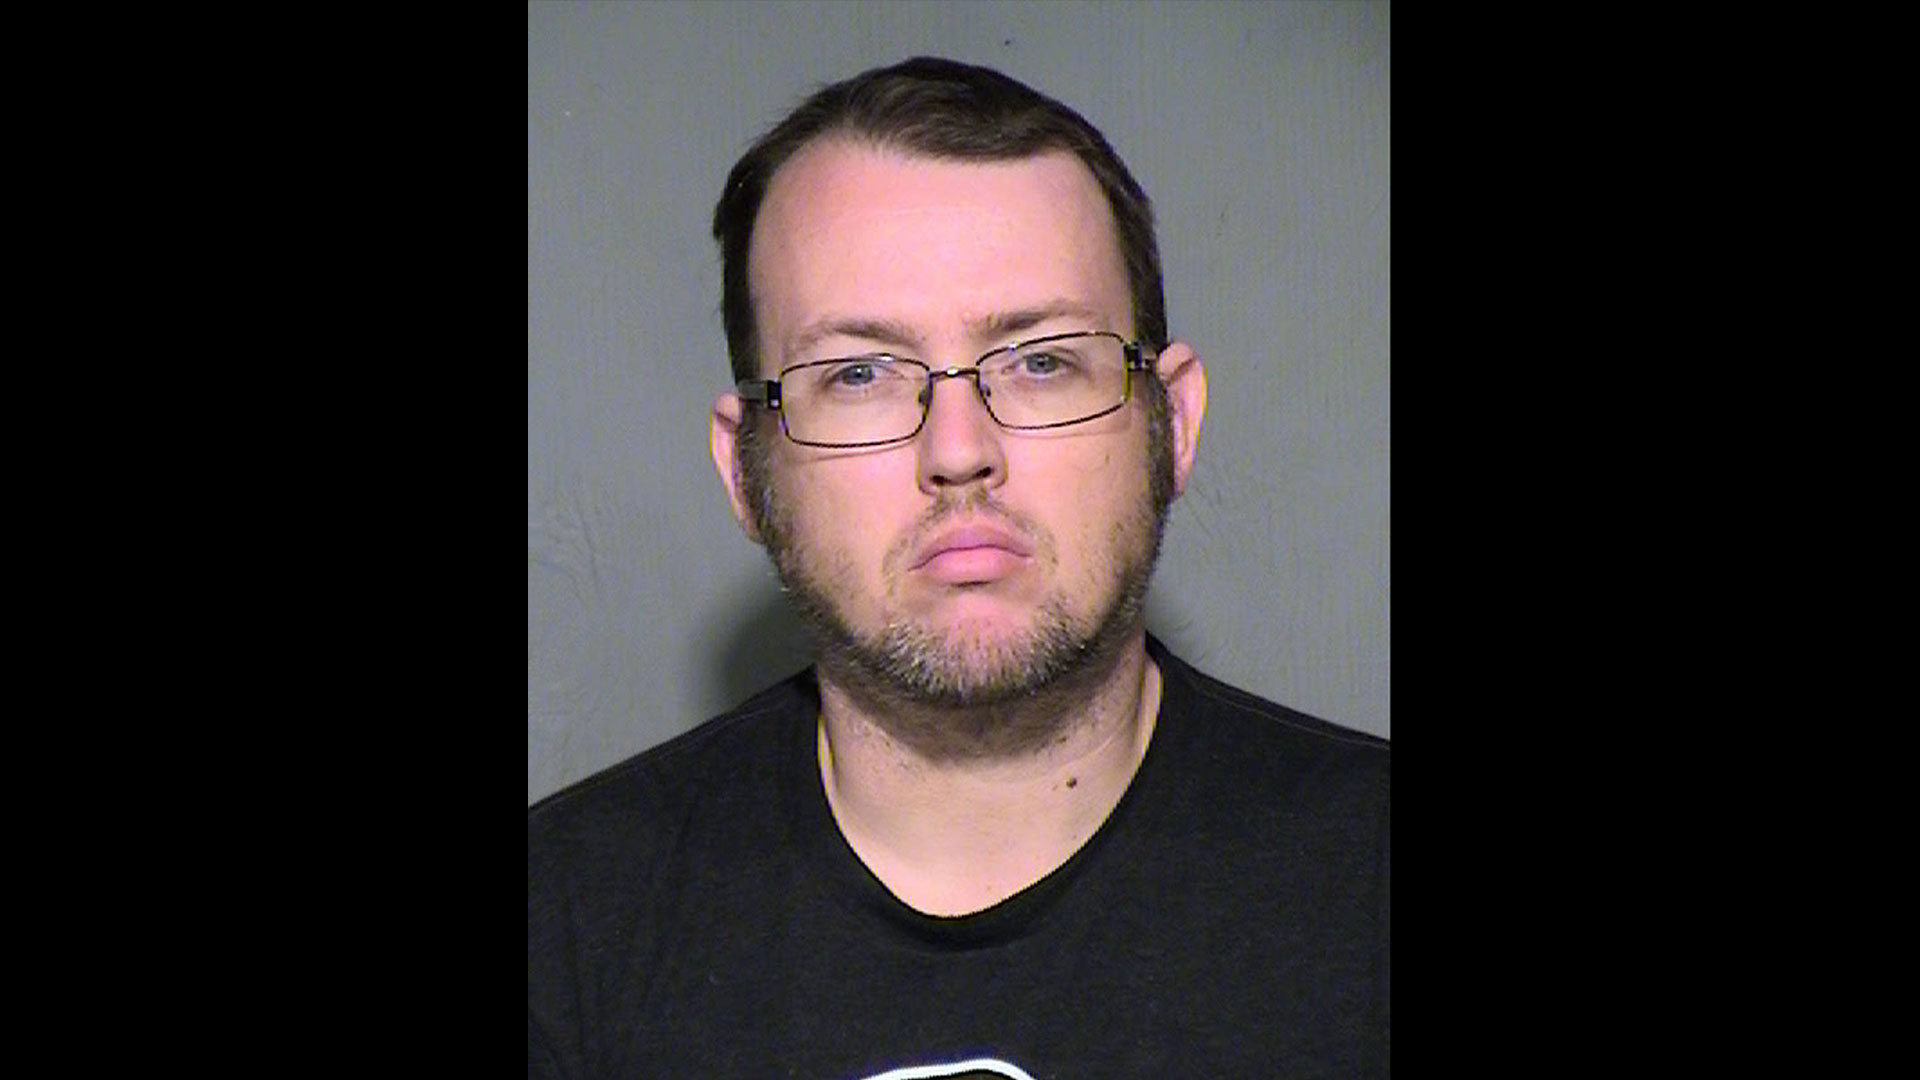 FILE - This undated booking photo provided by the Maricopa County Sheriff's Office shows Bryan Patr...